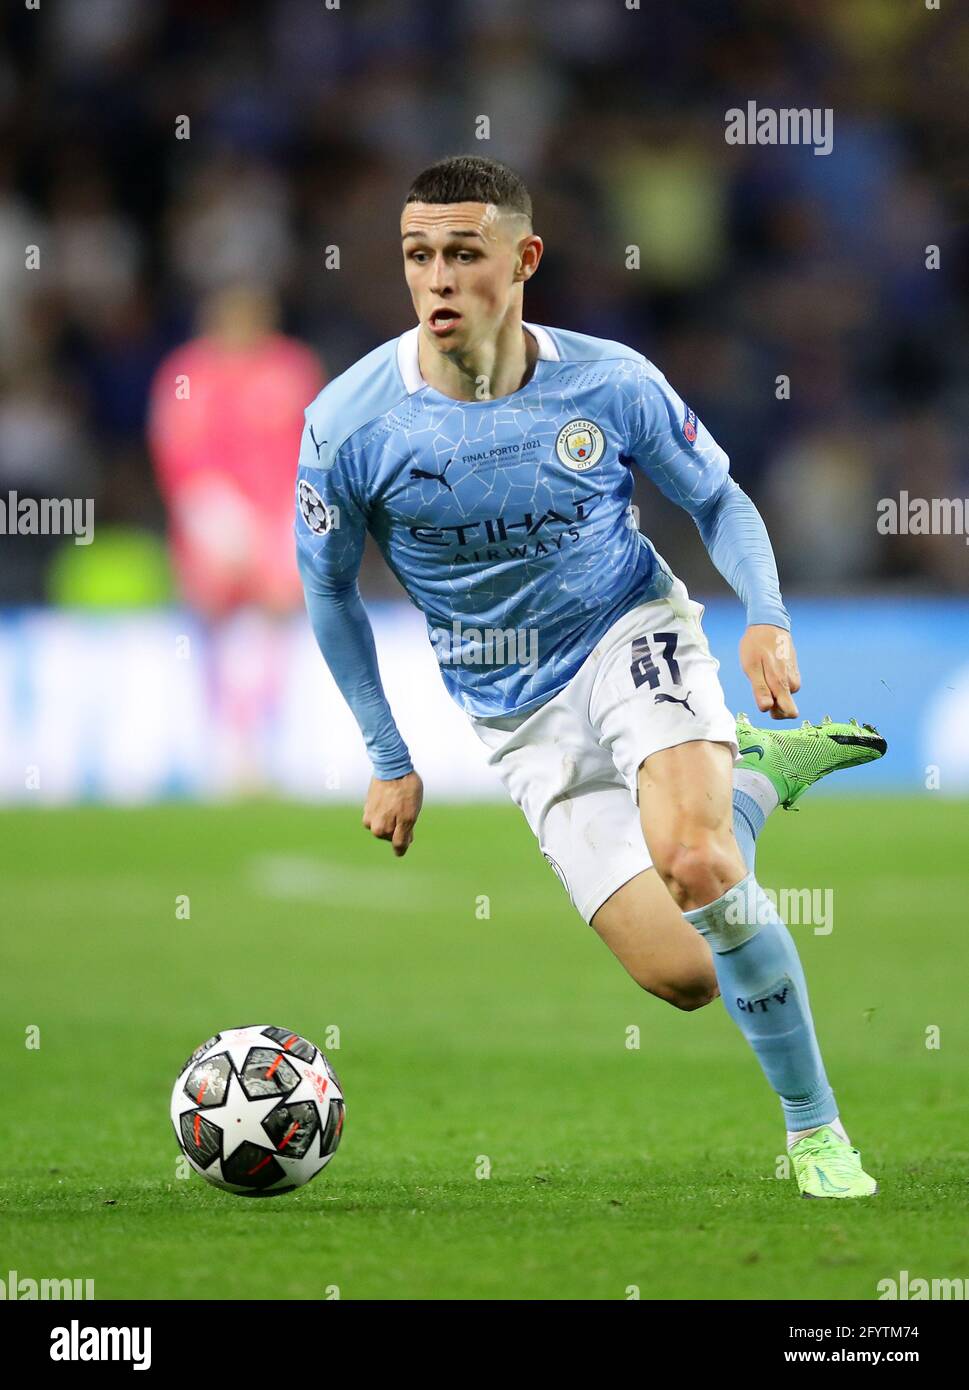 Porto, Portugal, 29th May 2021. Phil Foden of Manchester City during the UEFA Champions League match at the Estadio do Dragao, Porto. Picture credit should read: David Klein / Sportimage Stock Photo